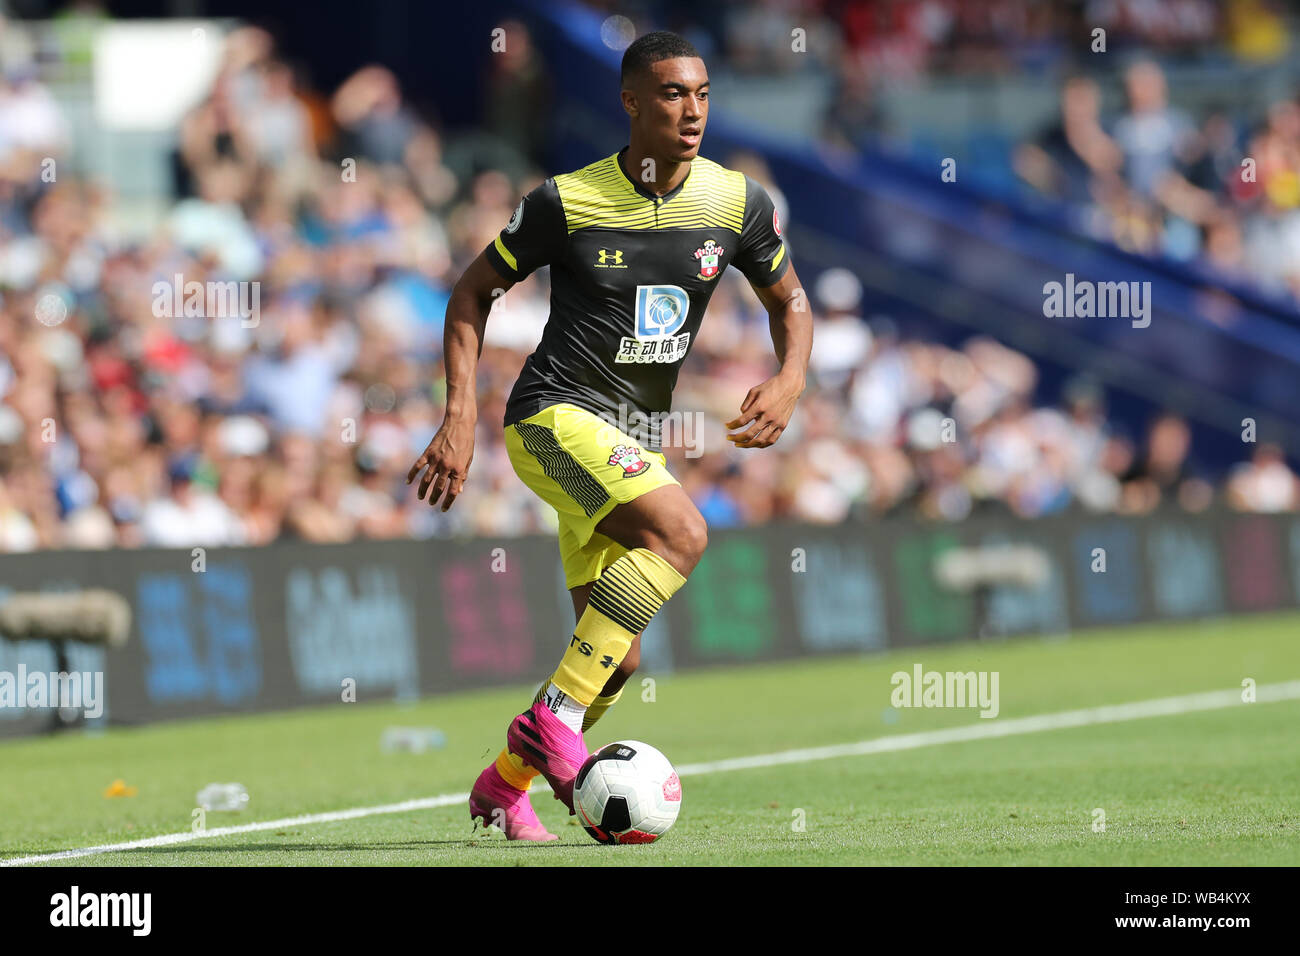 Brighton, UK.  24th Aug, 2019. Southampton defender Yan Valery in action during the Premier League match between Brighton and Hove Albion and Southampton at the American Express Community Stadium, Brighton and Hove on Saturday 24th August 2019. (Credit: Jon Bromley | MI News) Credit: MI News & Sport /Alamy Live News Stock Photo